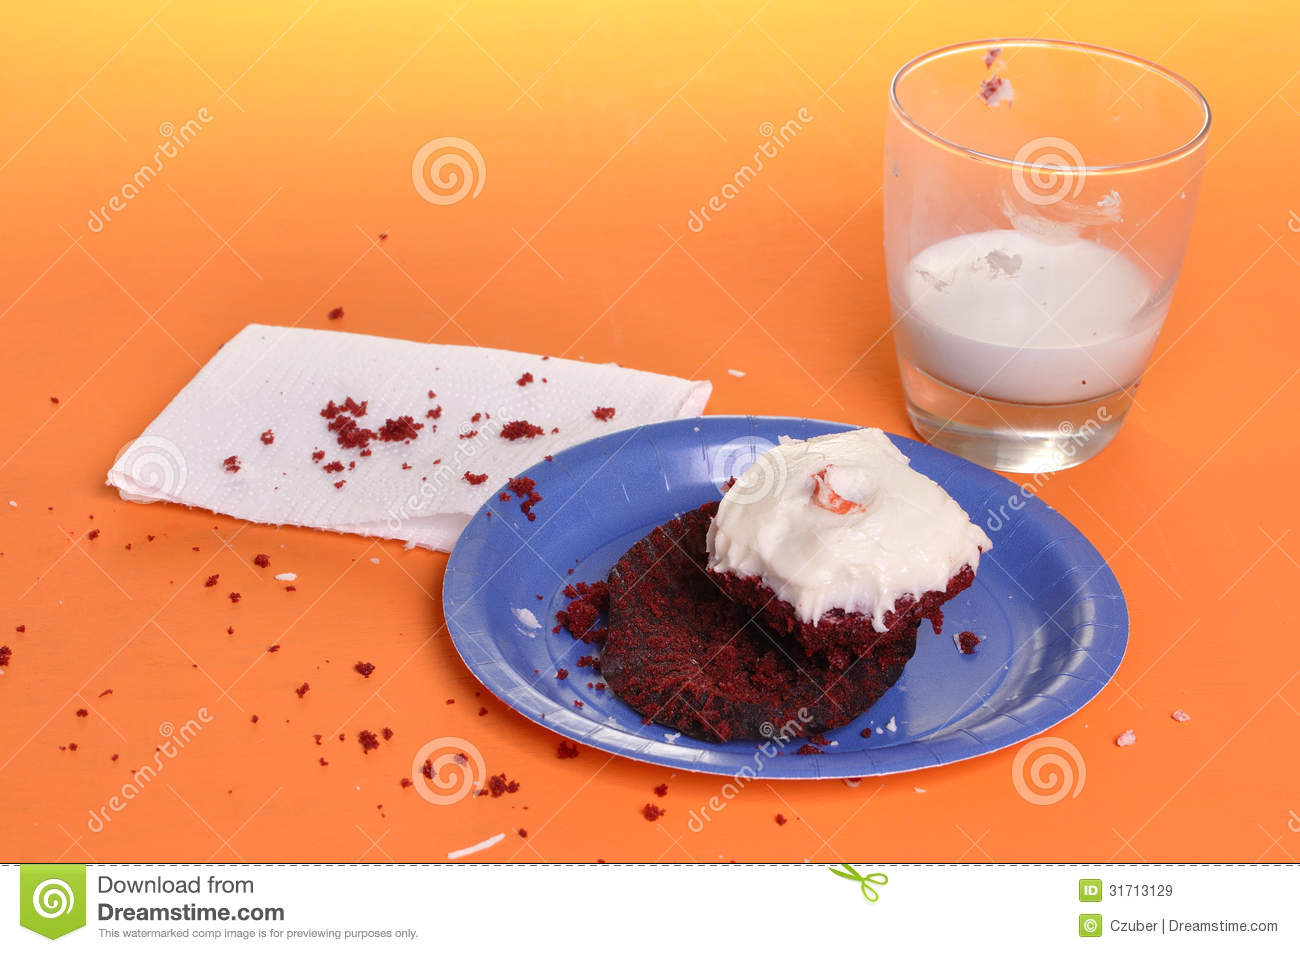 Messy Eater Royalty Free Stock Images   Image  31713129